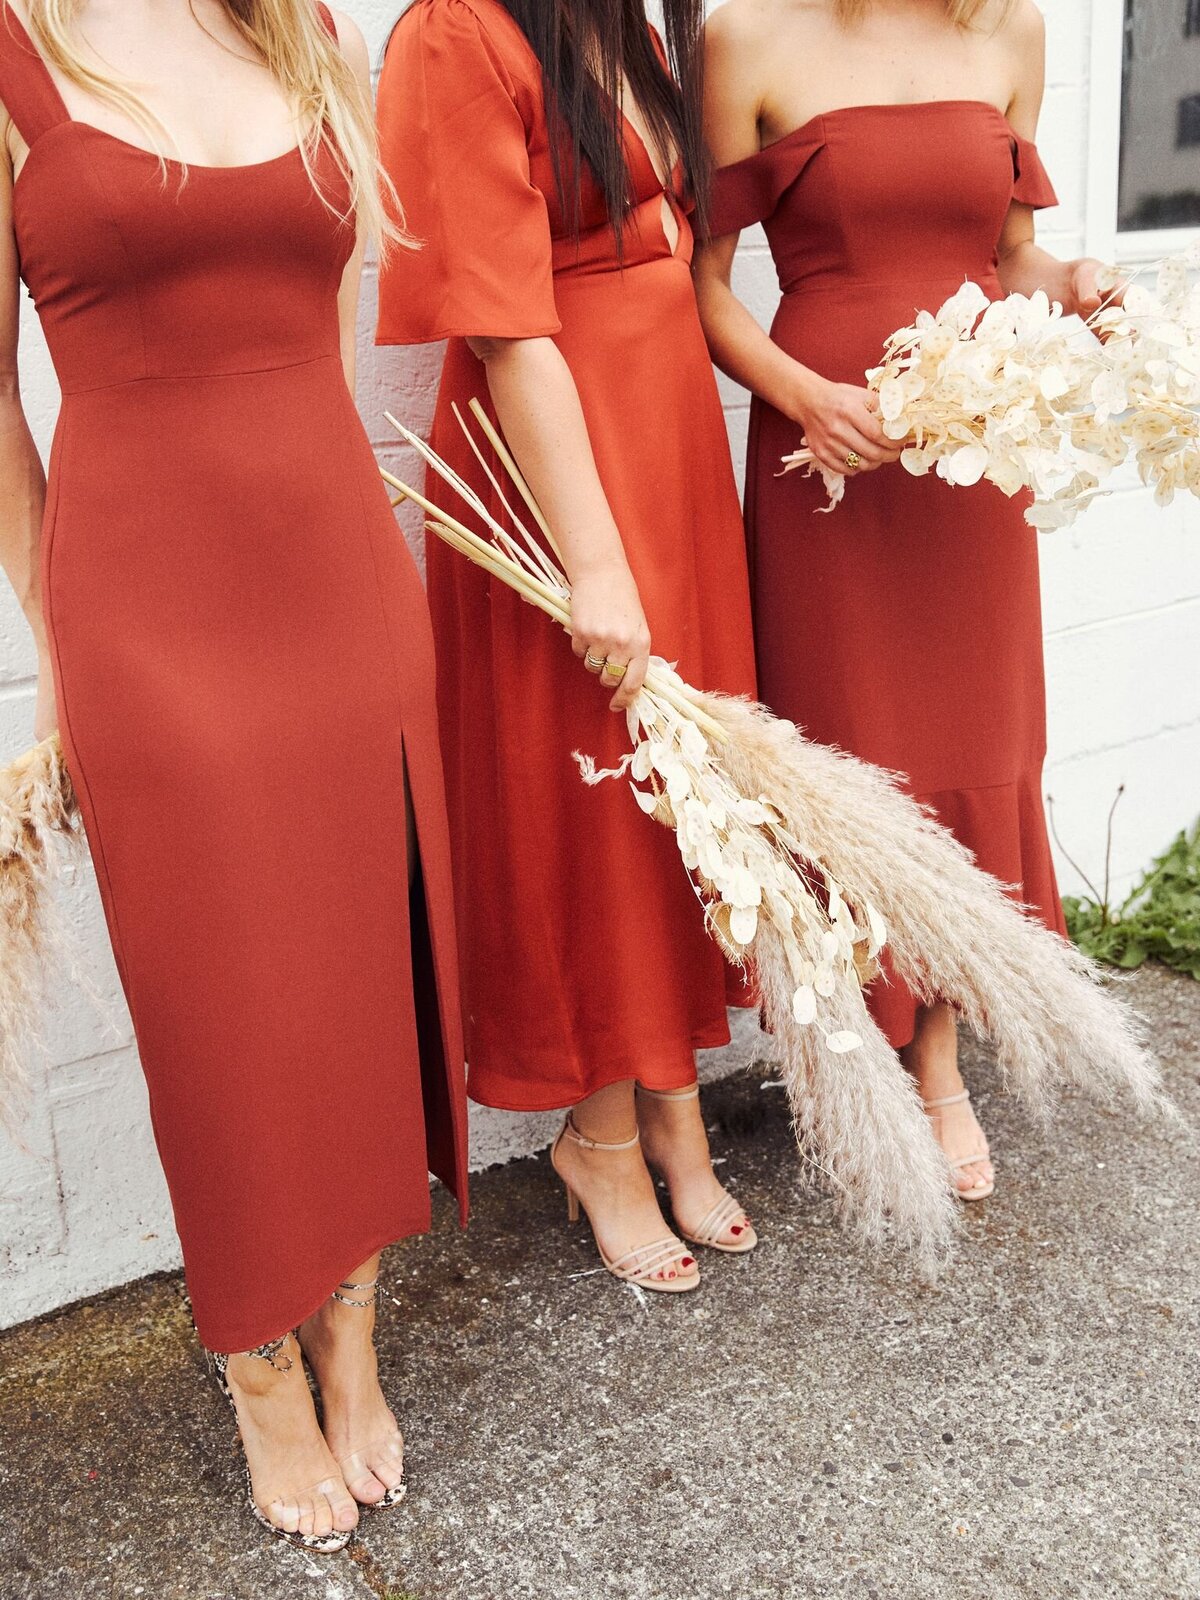 Rust bridesmaid dresses from Park & Fifth, a modern bridal boutique based in Calgary, Alberta. Featured on the Brontë Bride Vendor Guide.